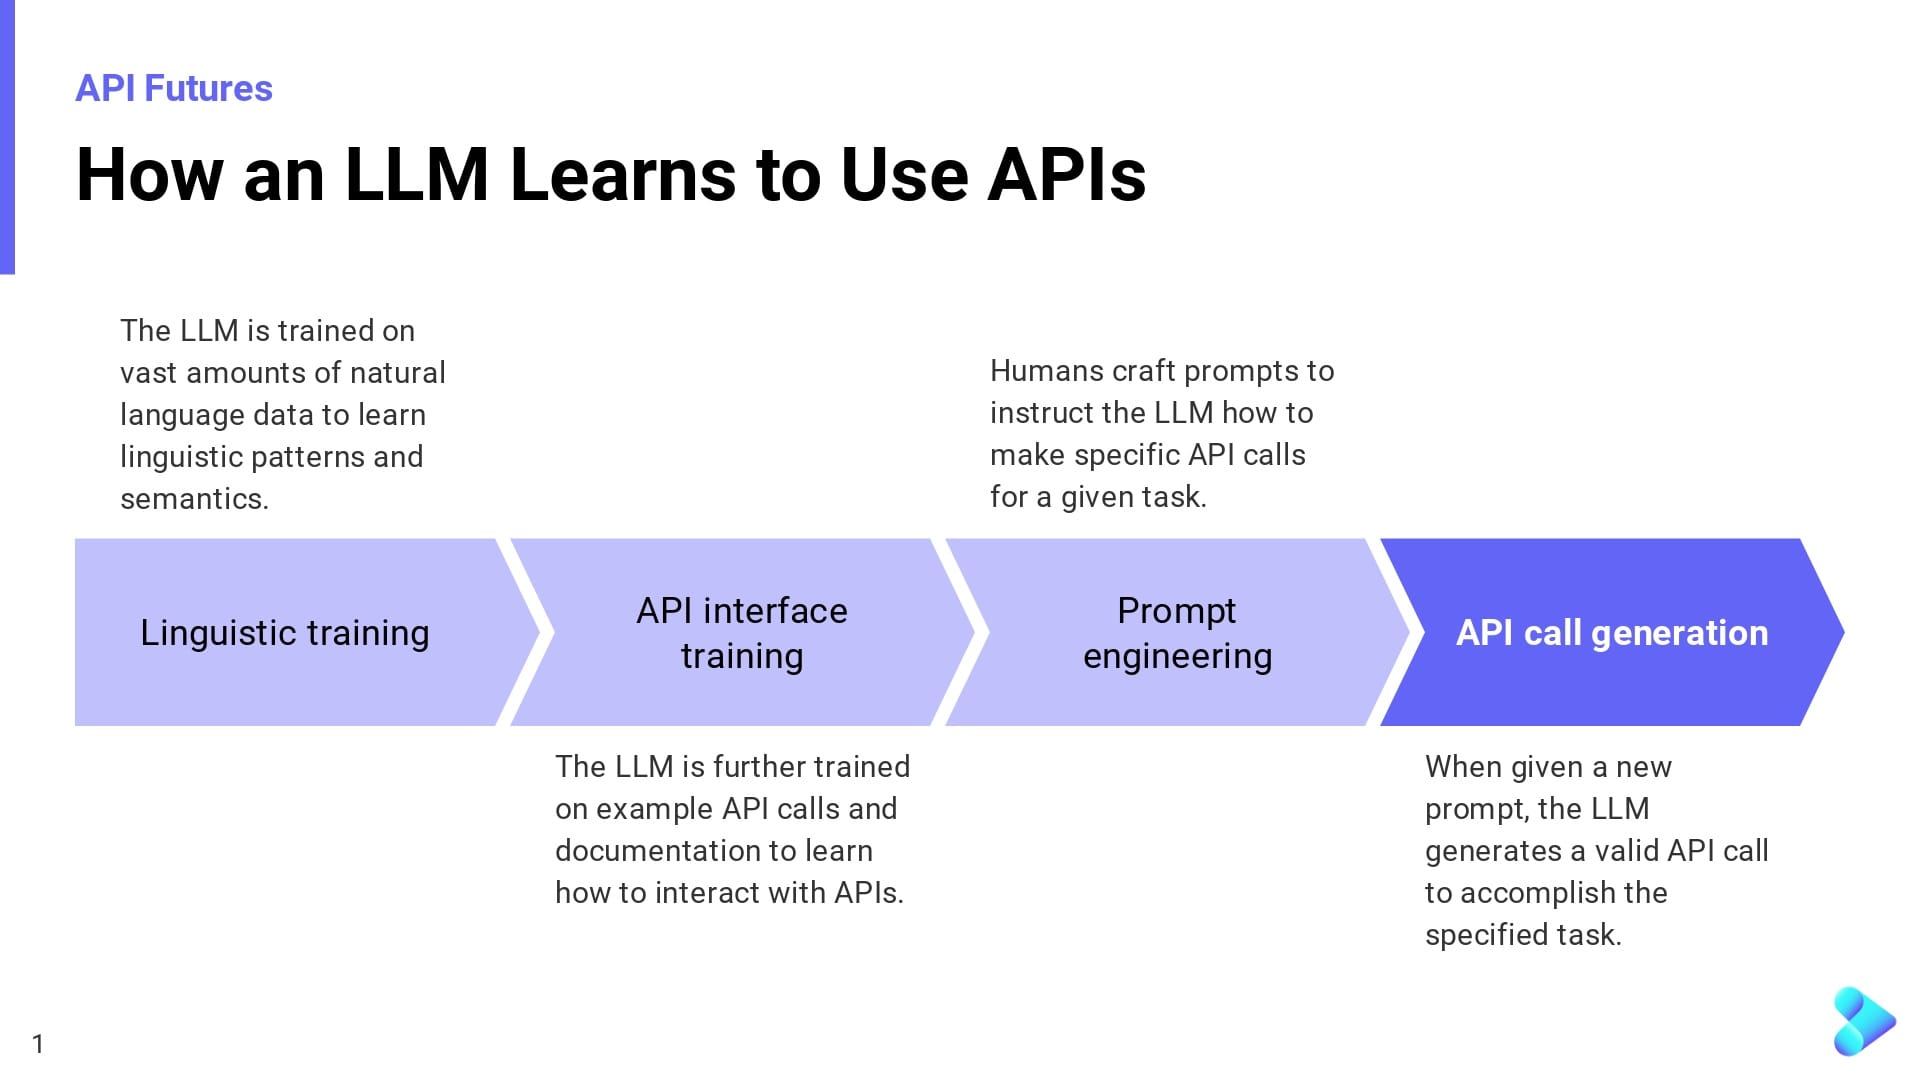 Diagram showing how LLMs learn to use APIs